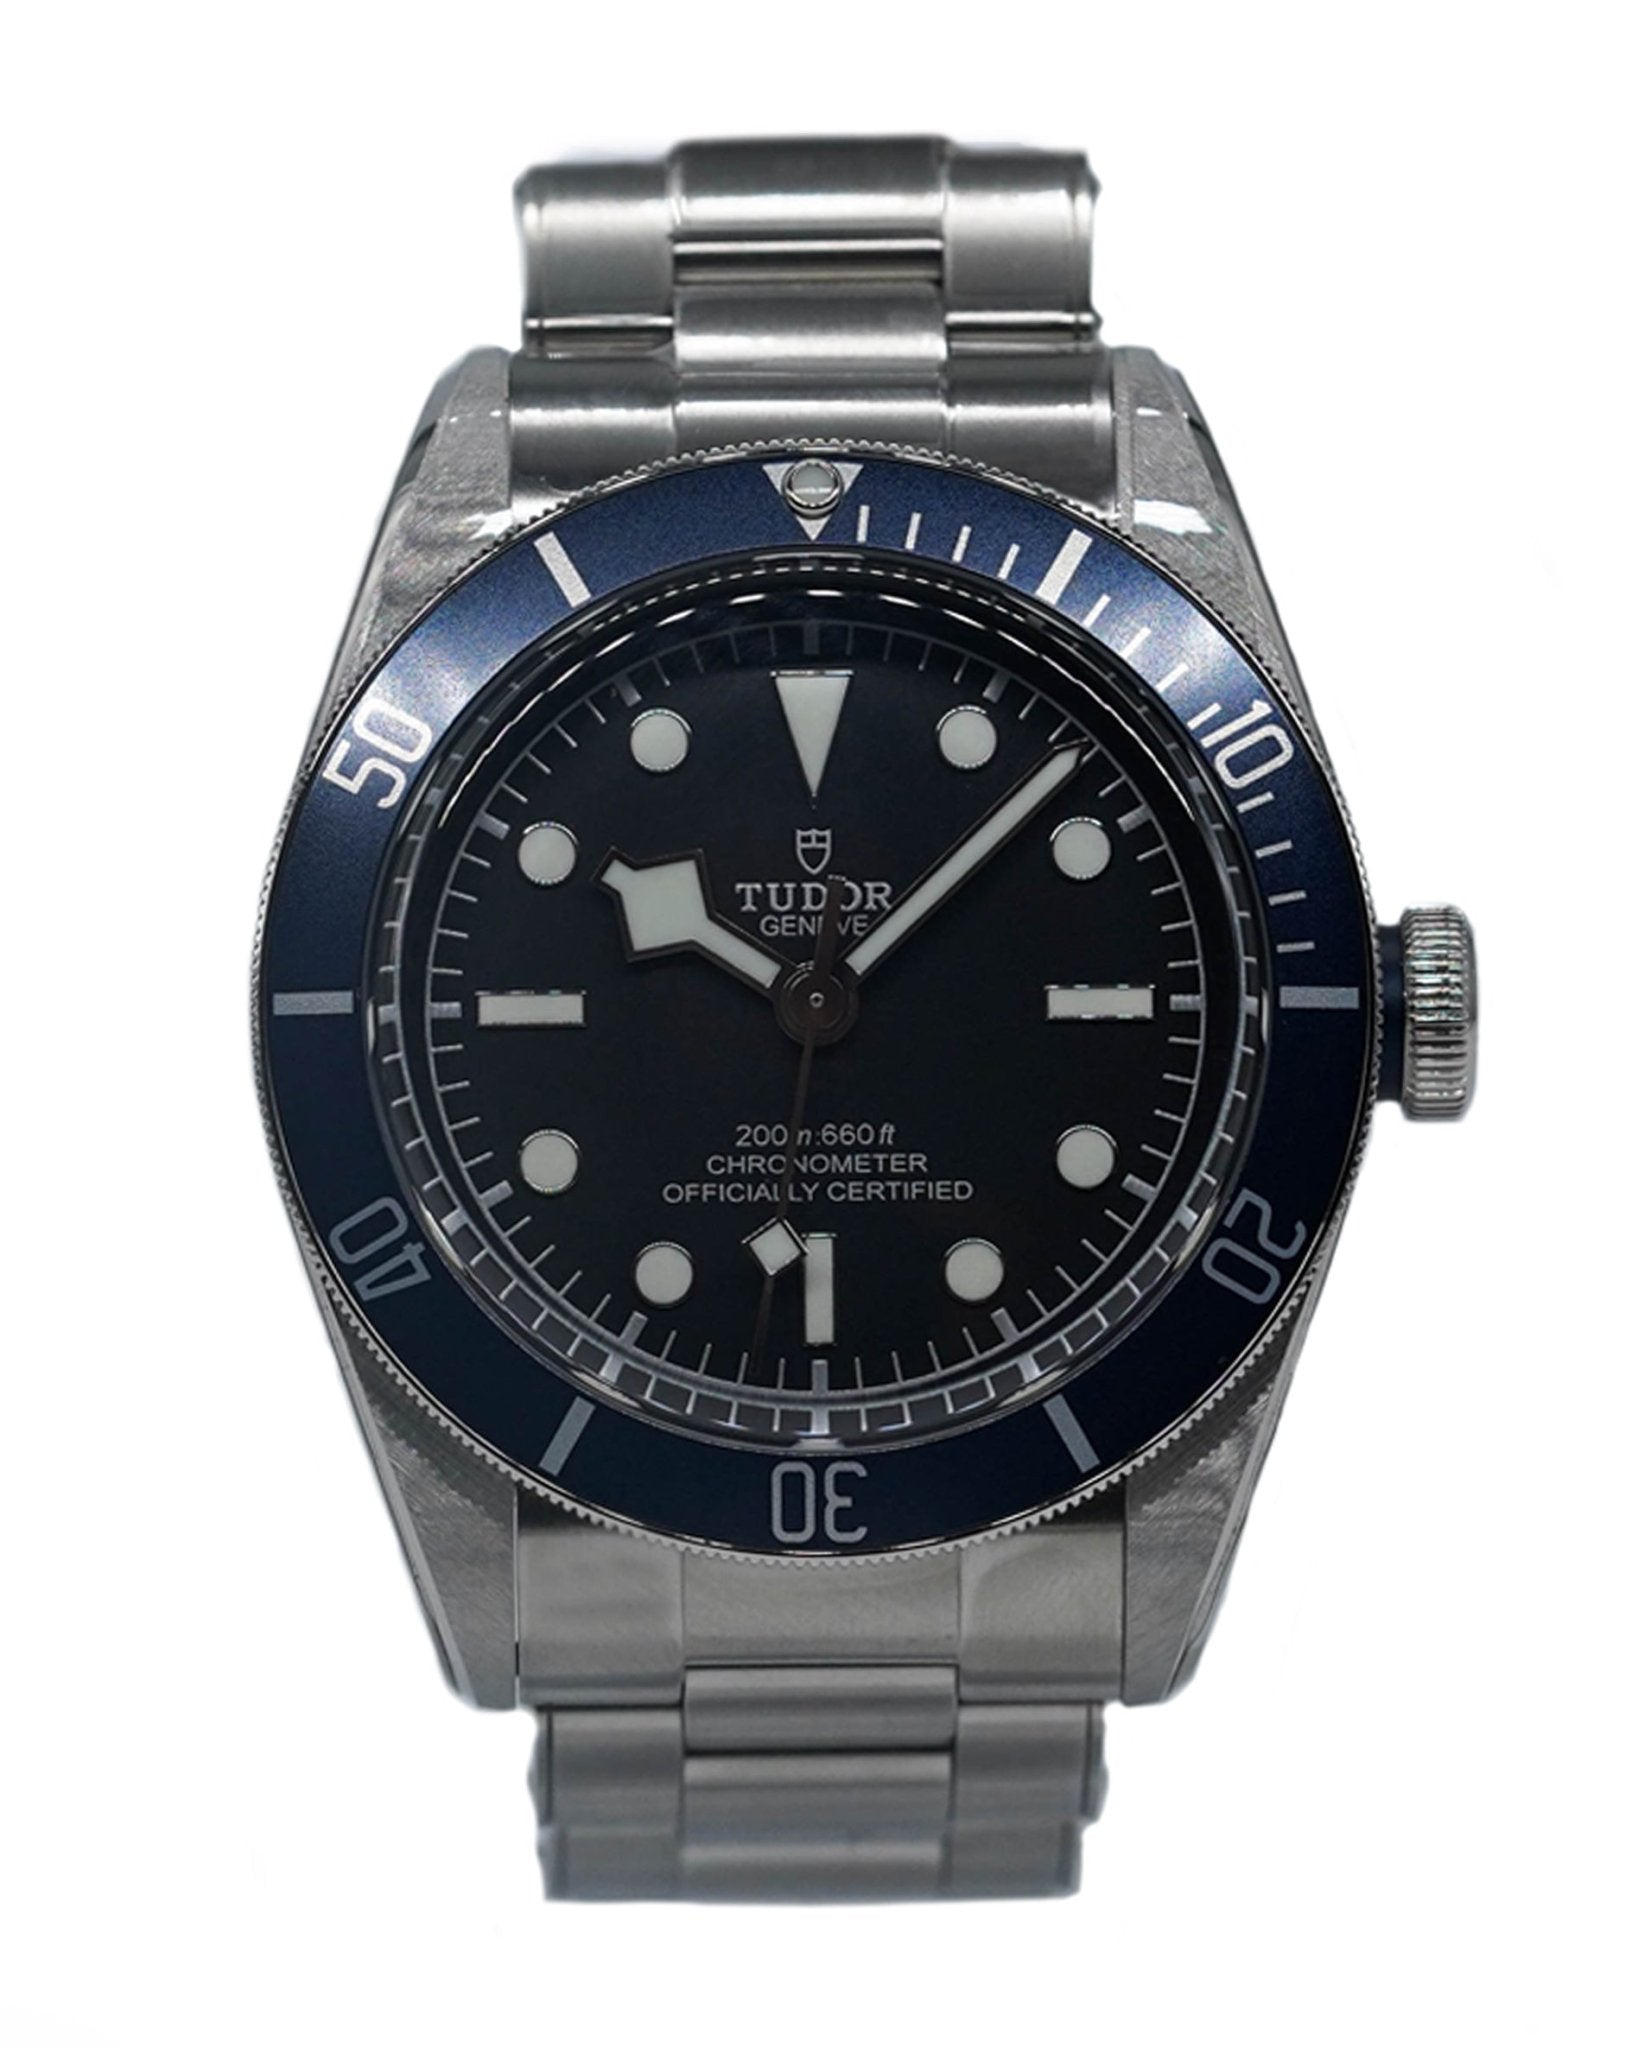 Tudor Black Bay Heritage 41 Watch Protection Kit - The Watch Protect Company